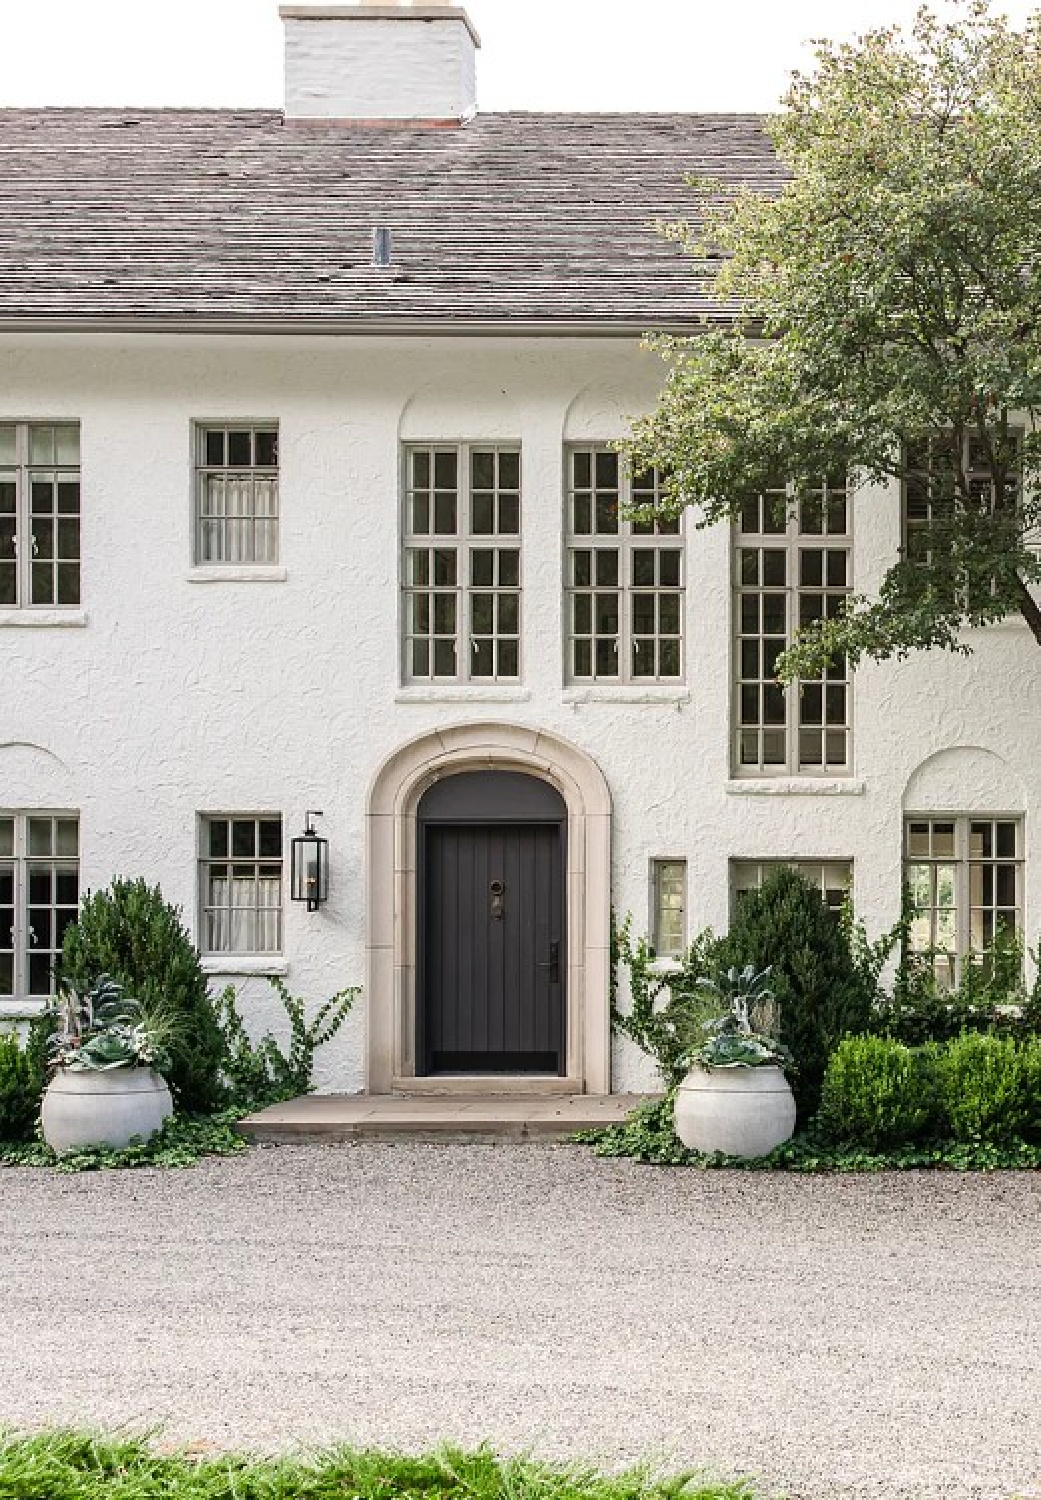 Front facade of Kate Marker's 1920 white stucco Barrington Hills Home (160 N. Buckley Rd) with modern, serene, unfussy, timeless interiors. #katemarkerinteriors @thedawnmckennagroup #katemarkerhome